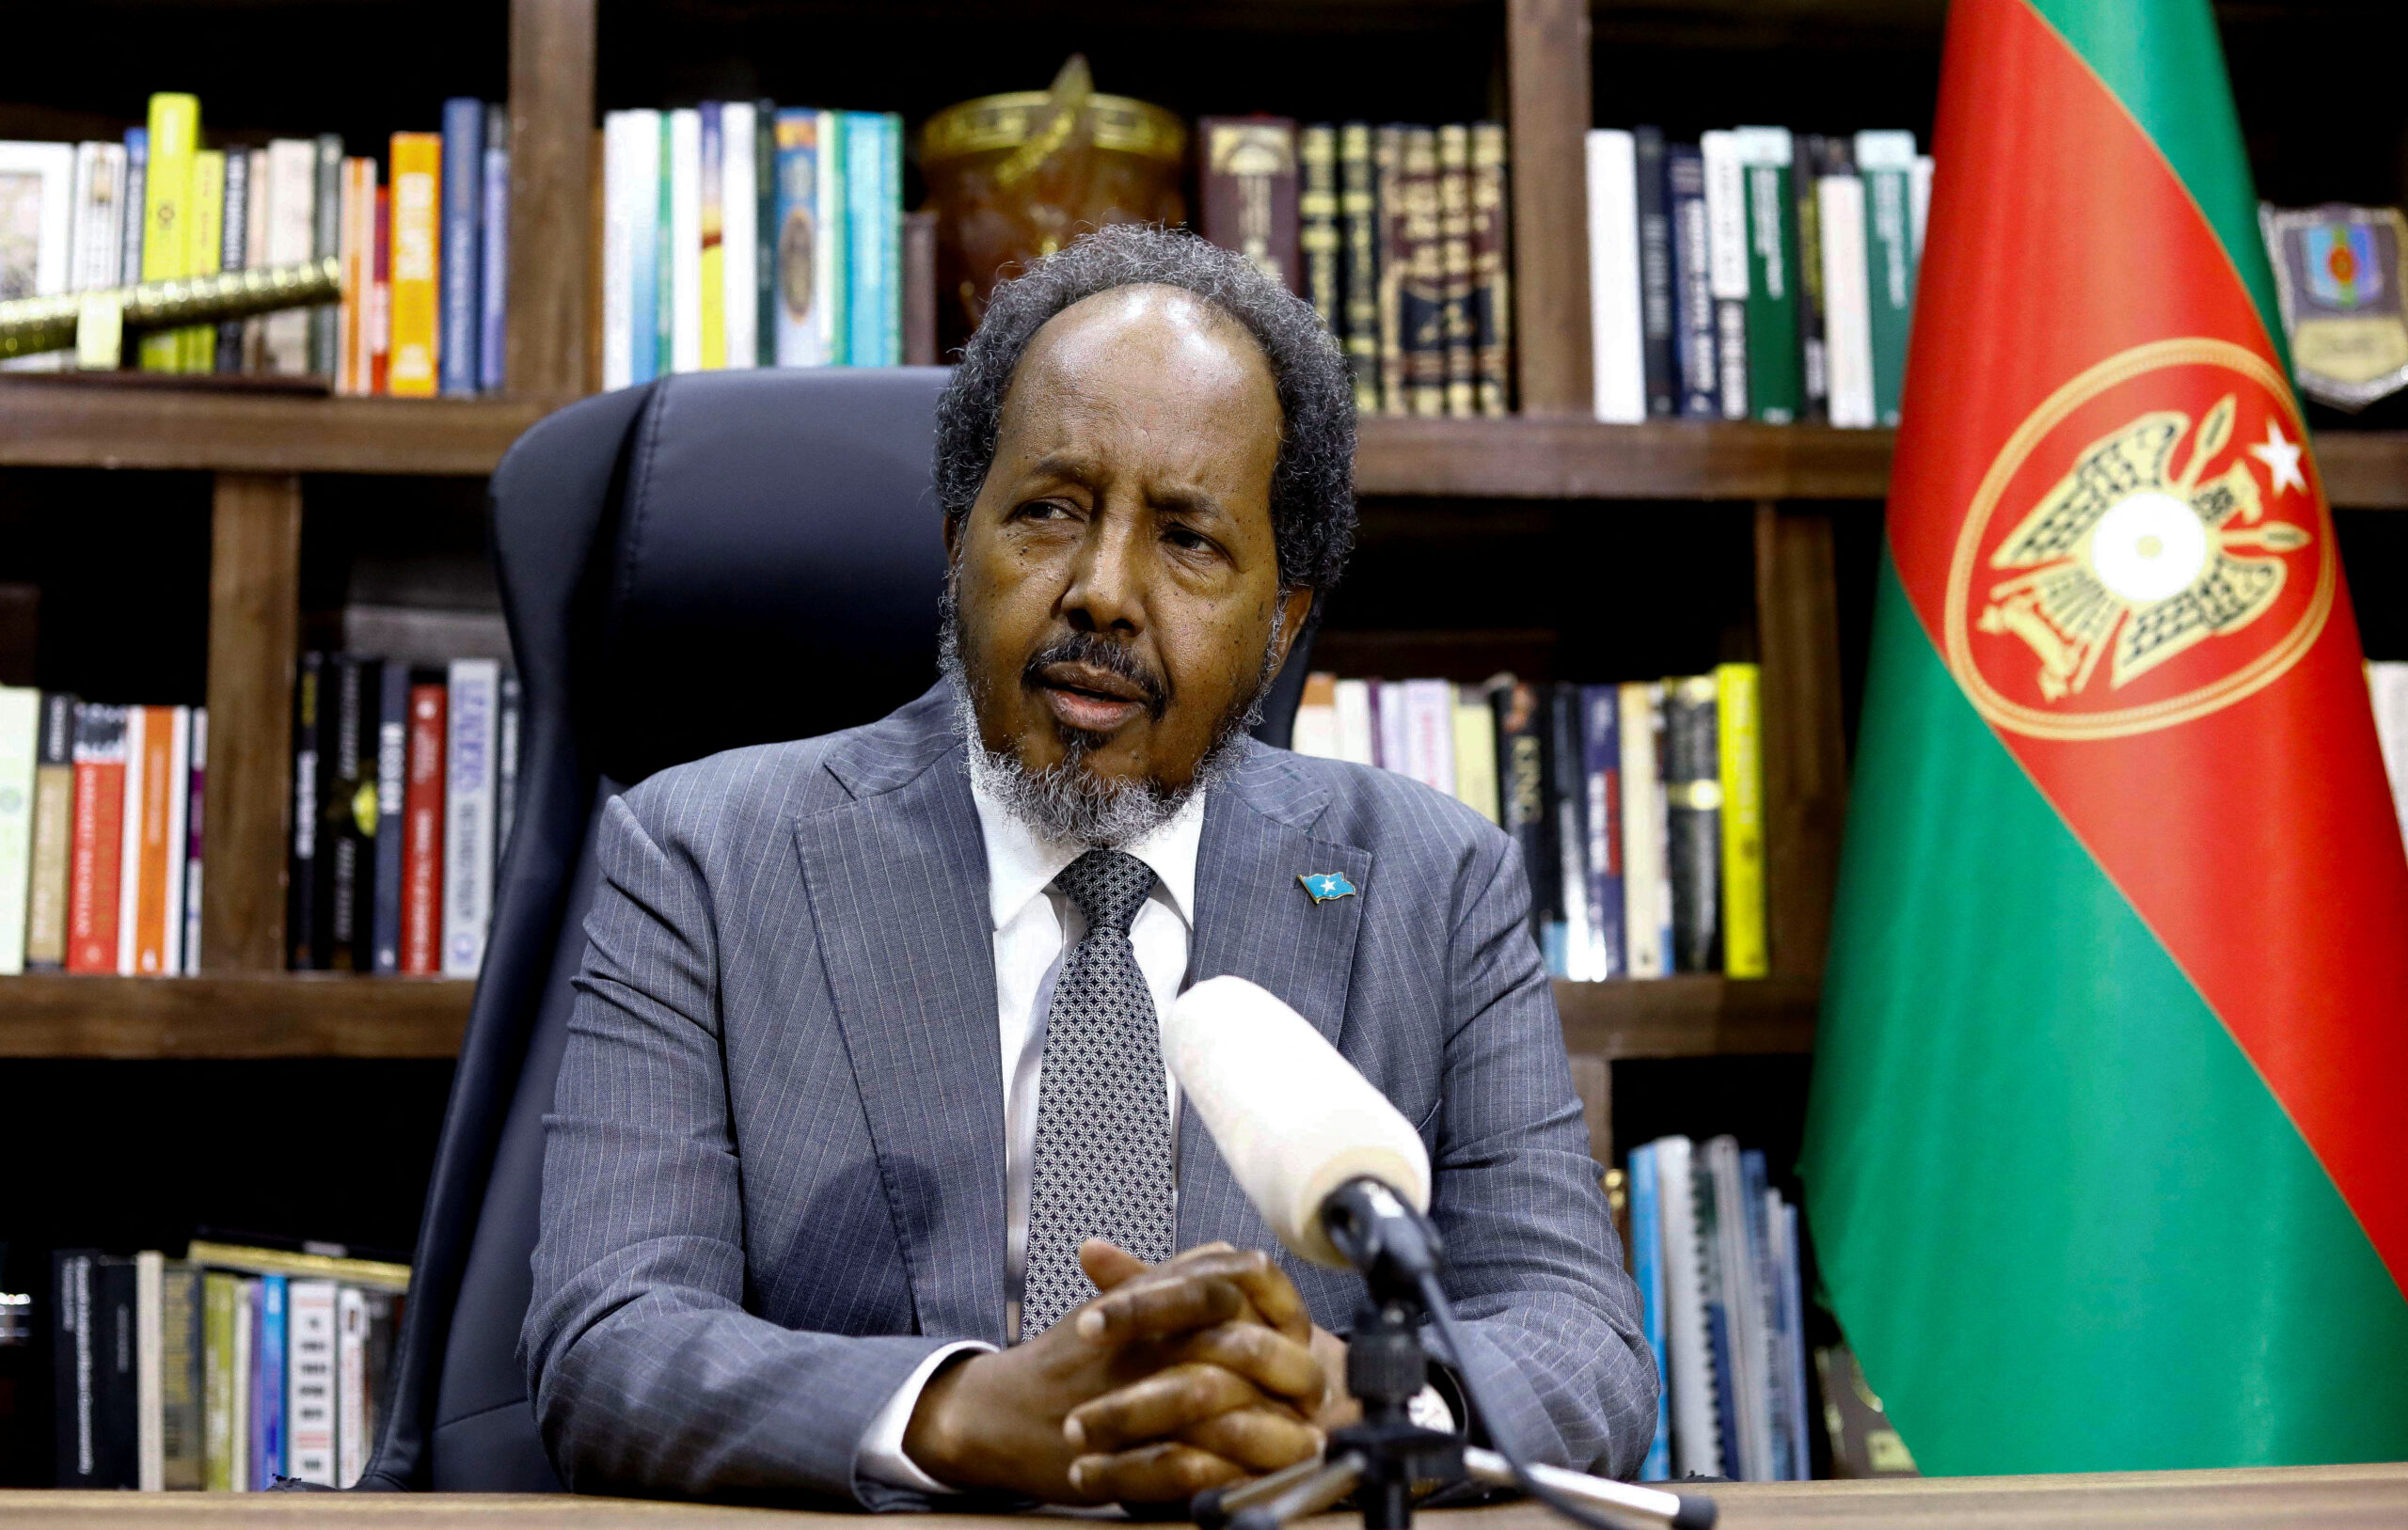 Somalia's President Hassan Sheikh Mohamud speaks during an interview with Reuters, in his office in Mogadishu. REUTERS/Feisal Omar